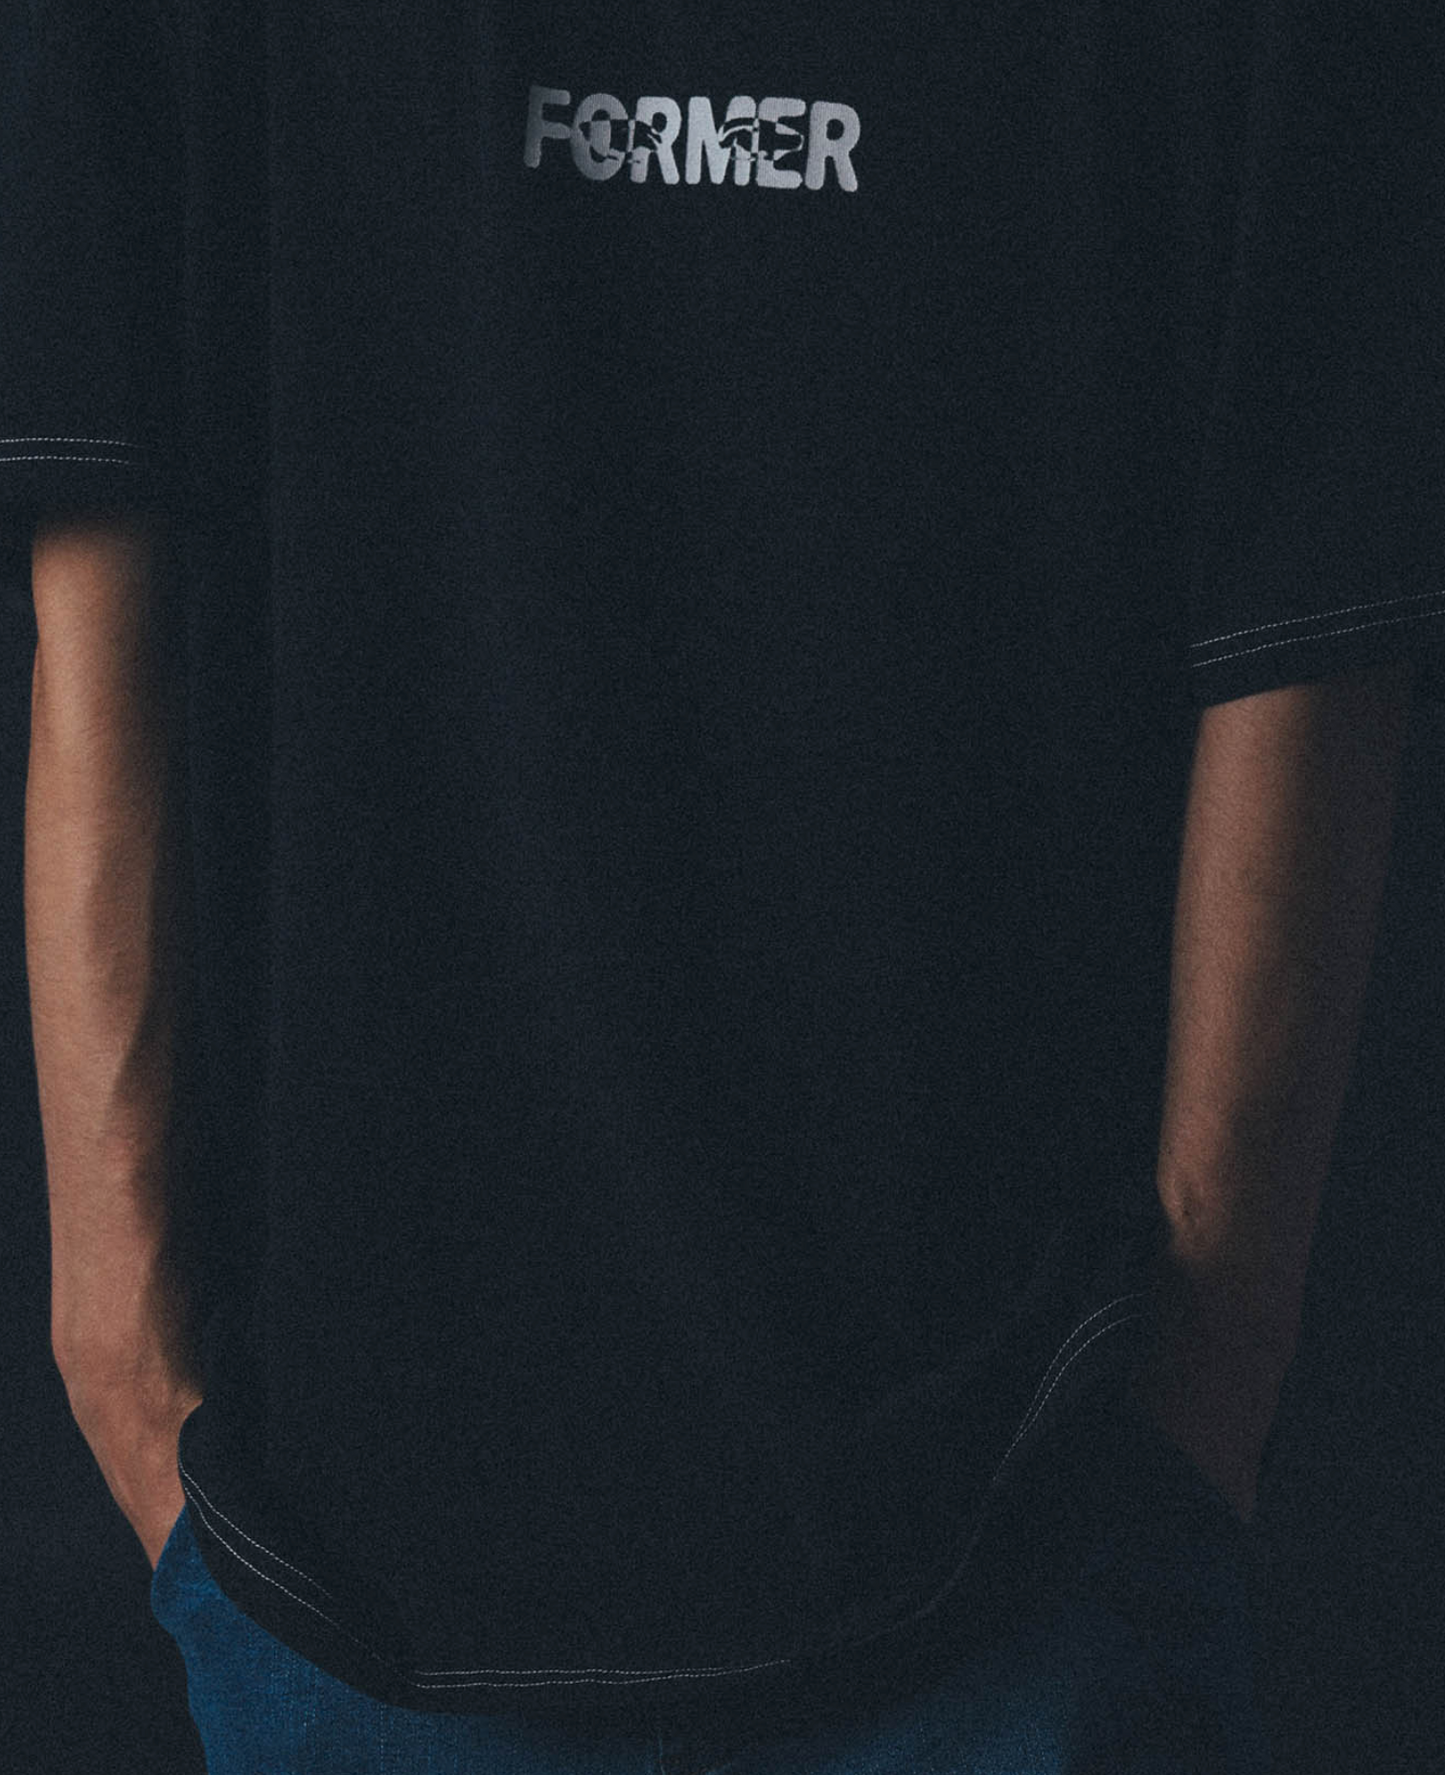 Former Scope O/S Tee - BLK